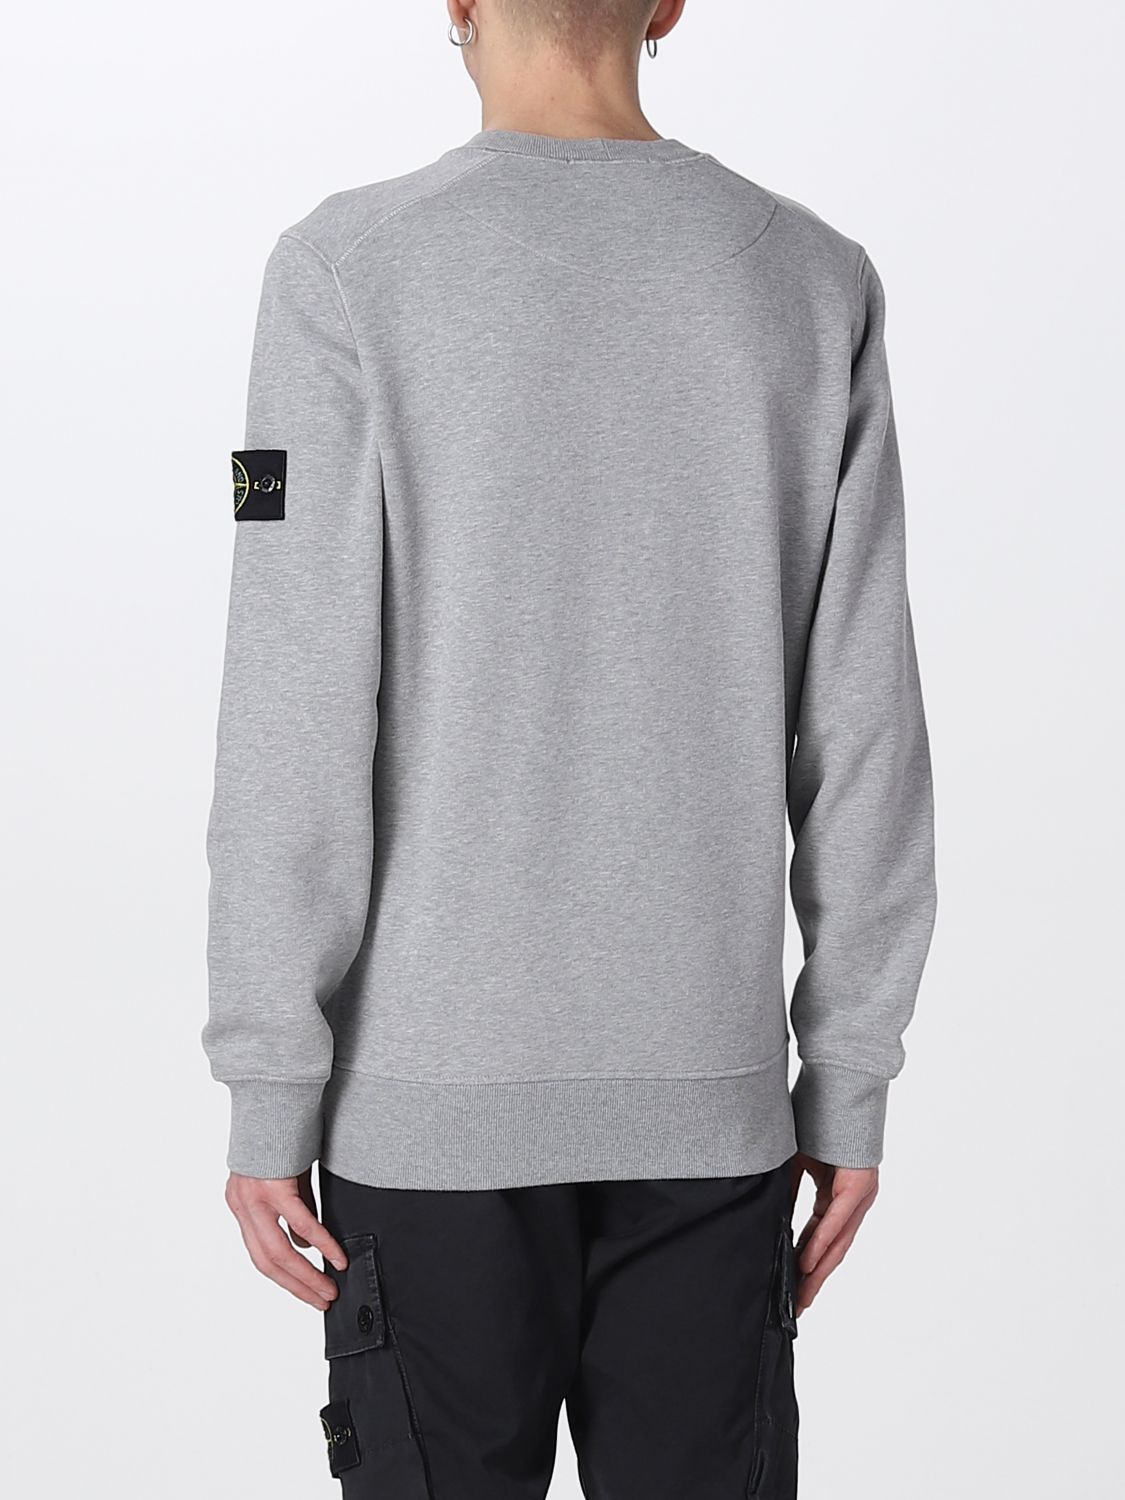 Sweatshirt Stone Island: Stone Island sweatshirt for man grey 3